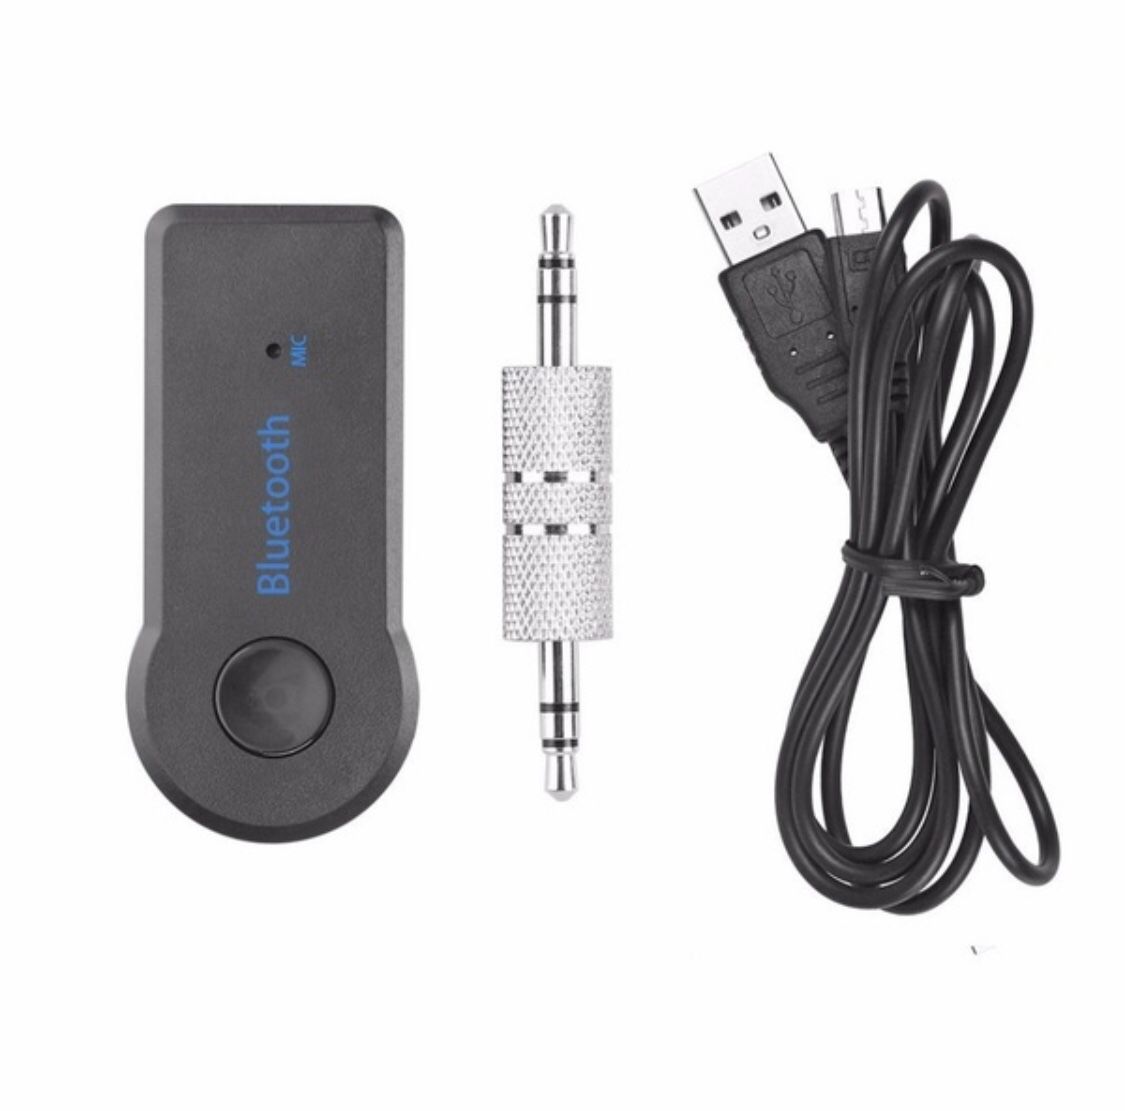 2018 Hot Sale Wireless Bluetooth 3.5mm AUX Audio Stereo Music Home Car Receiver Adapter Mic Bluetooth Receiver 3.5mm Wireless Car Bluetooth Adaptor A